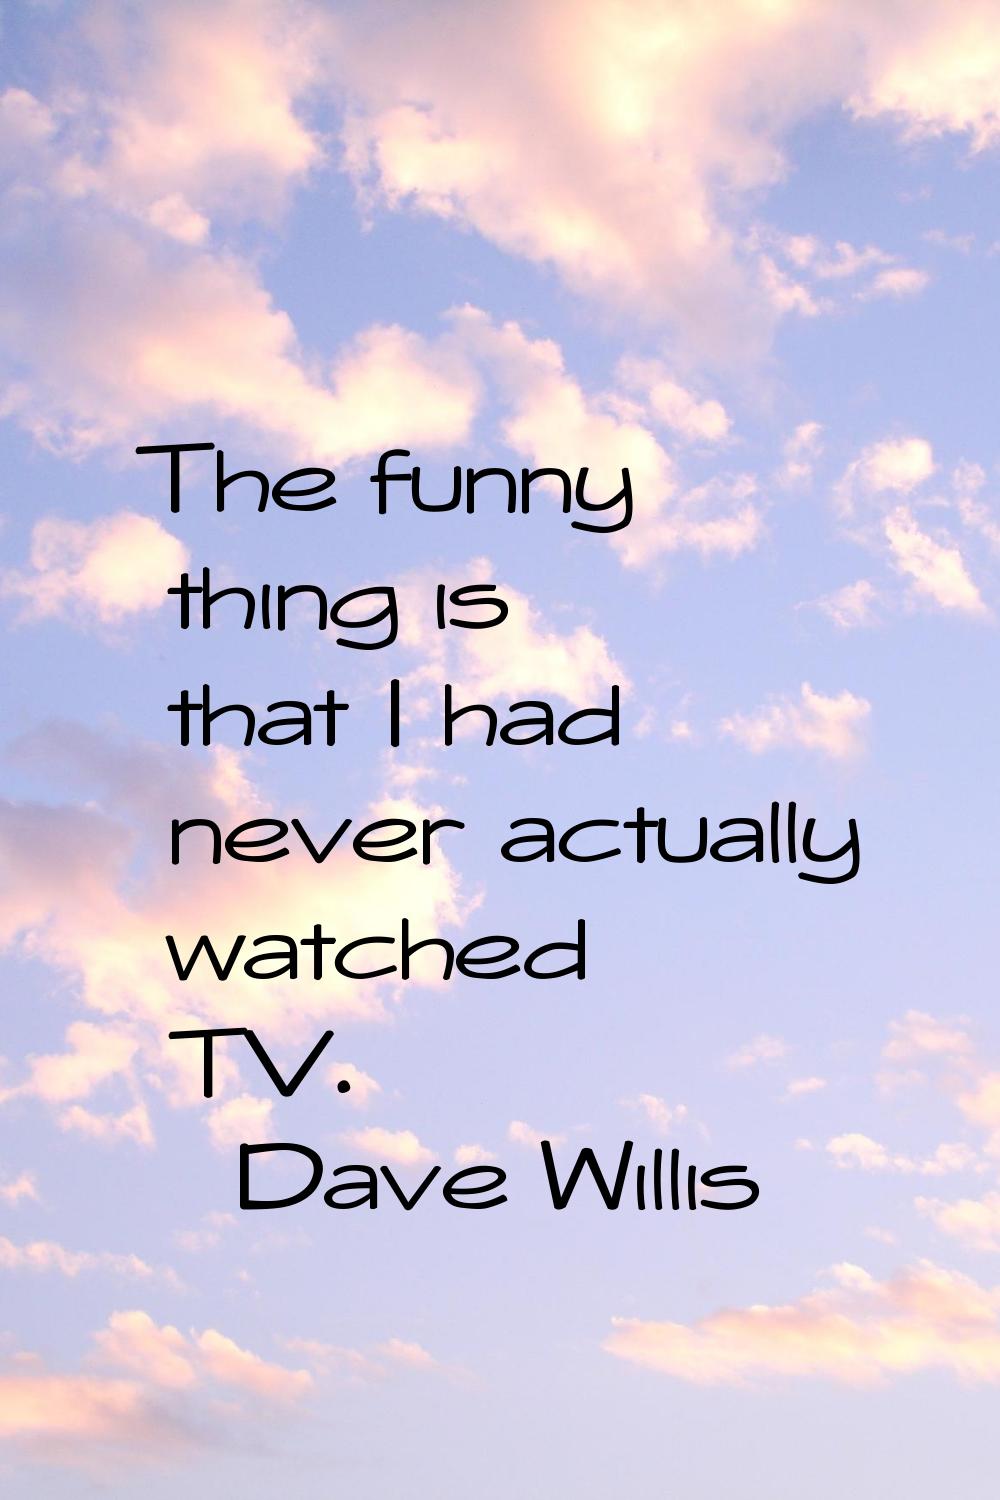 The funny thing is that I had never actually watched TV.